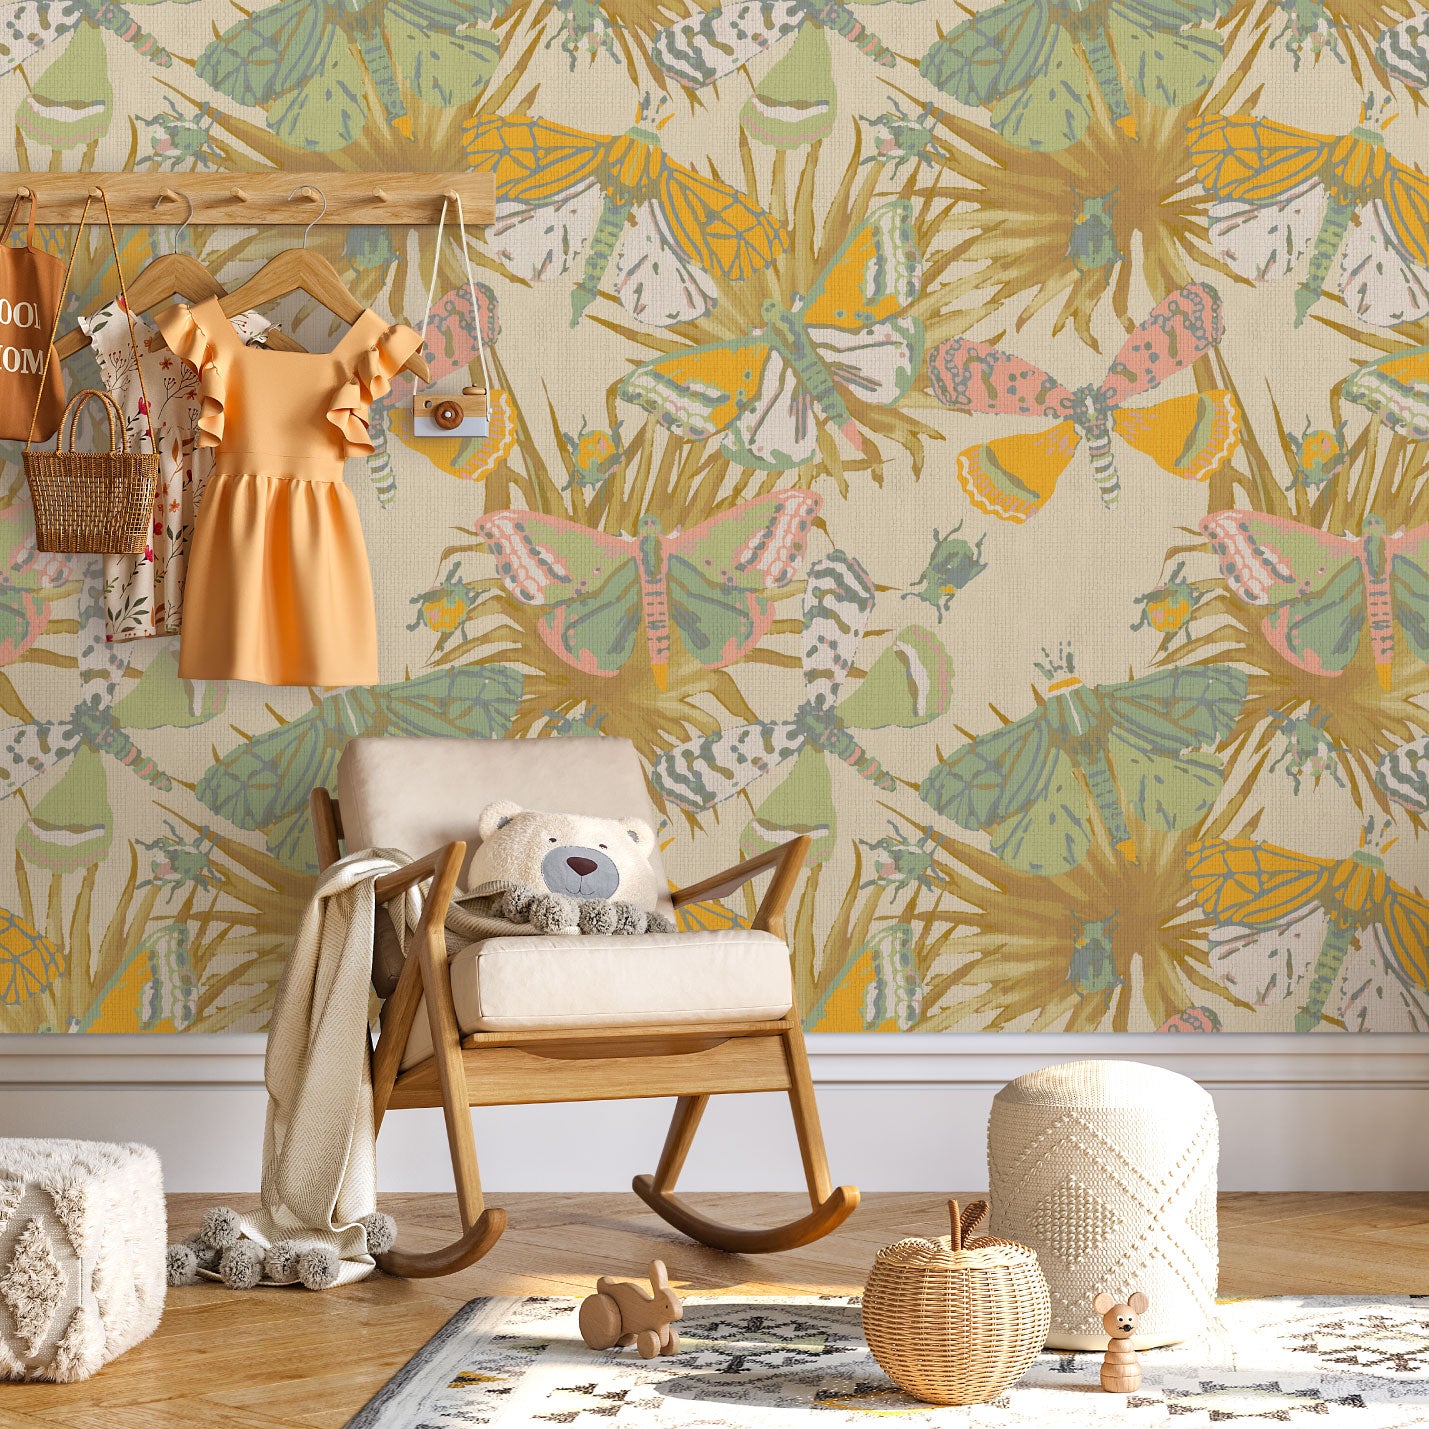 paperweave paper weave wallpaper Natural Textured Eco-Friendly Non-toxic High-quality Sustainable Interior Design Bold Custom Tailor-made Retro chic Bold tropical butterfly bug palm leaves animals botanical garden nature kids playroom bedroom nursery beige neutral cream